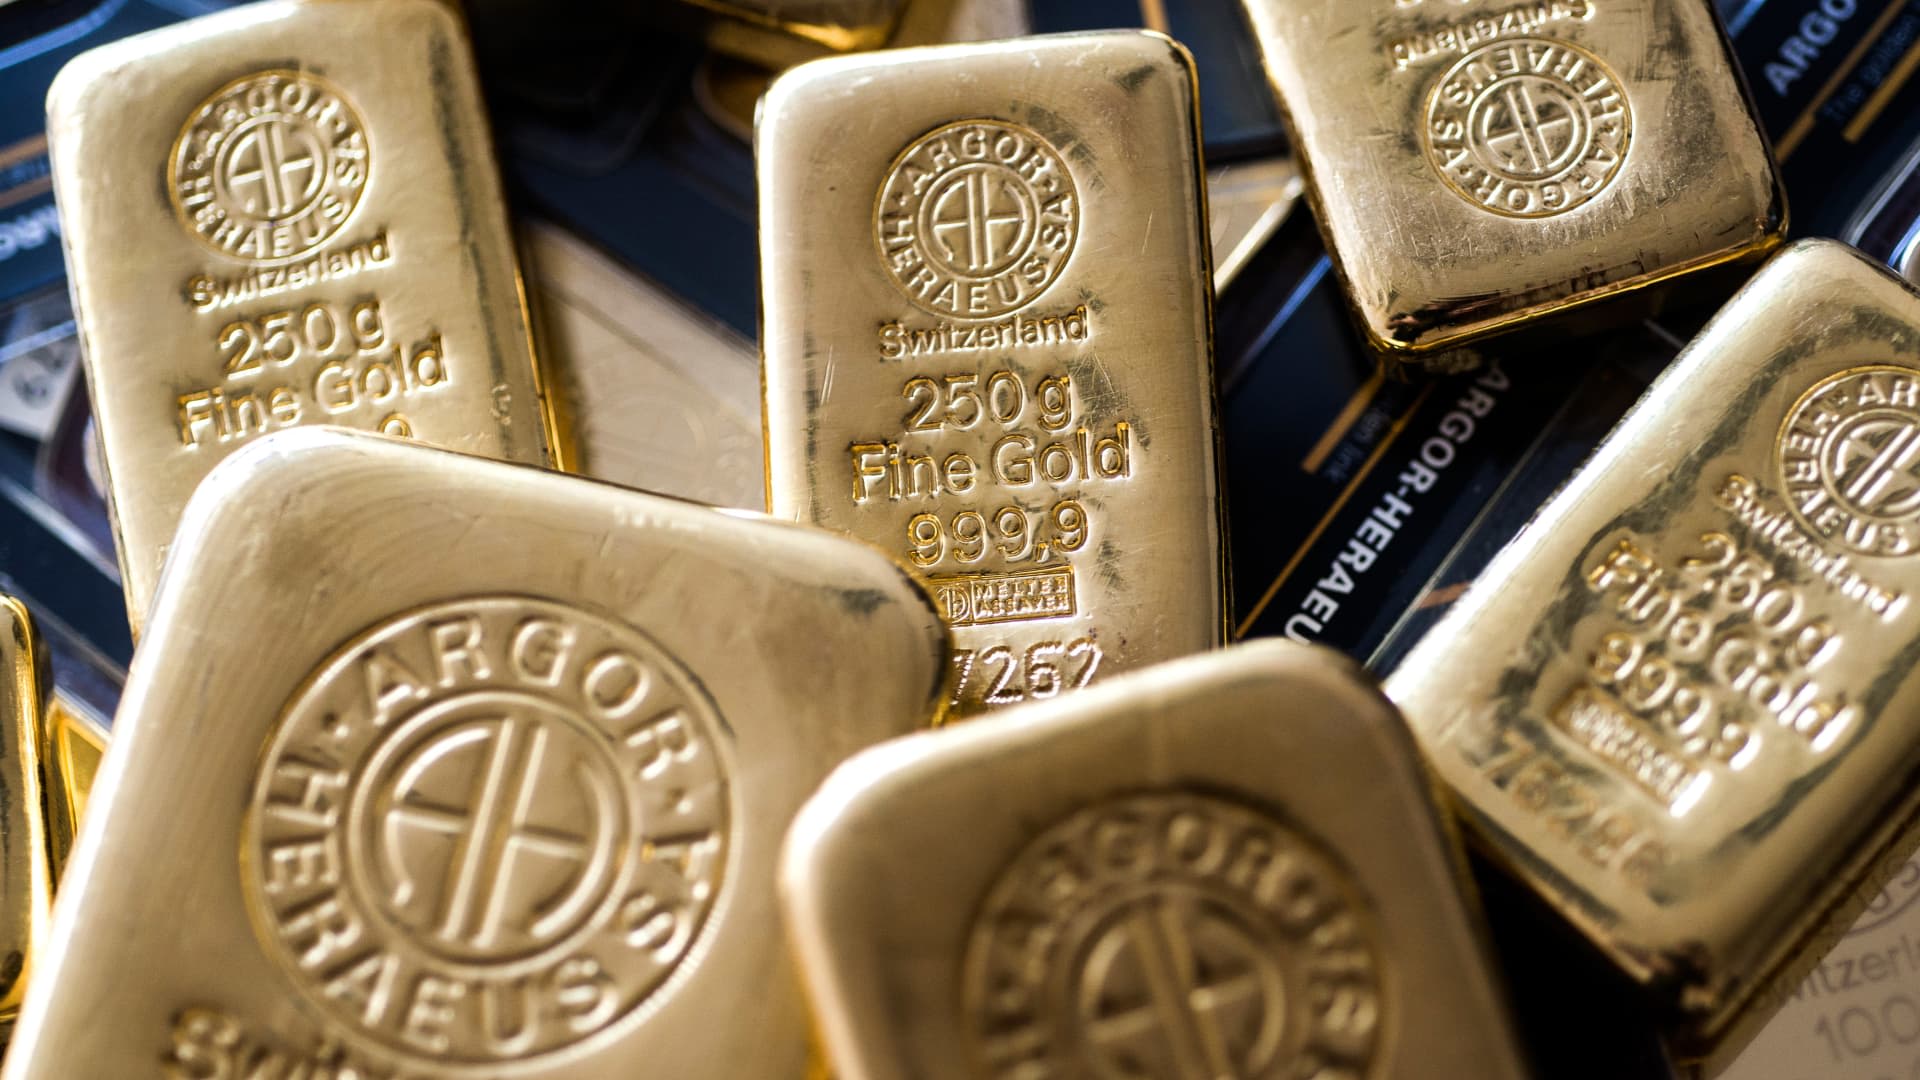 Gold slips as Fed meeting looms, but sees third monthly gain